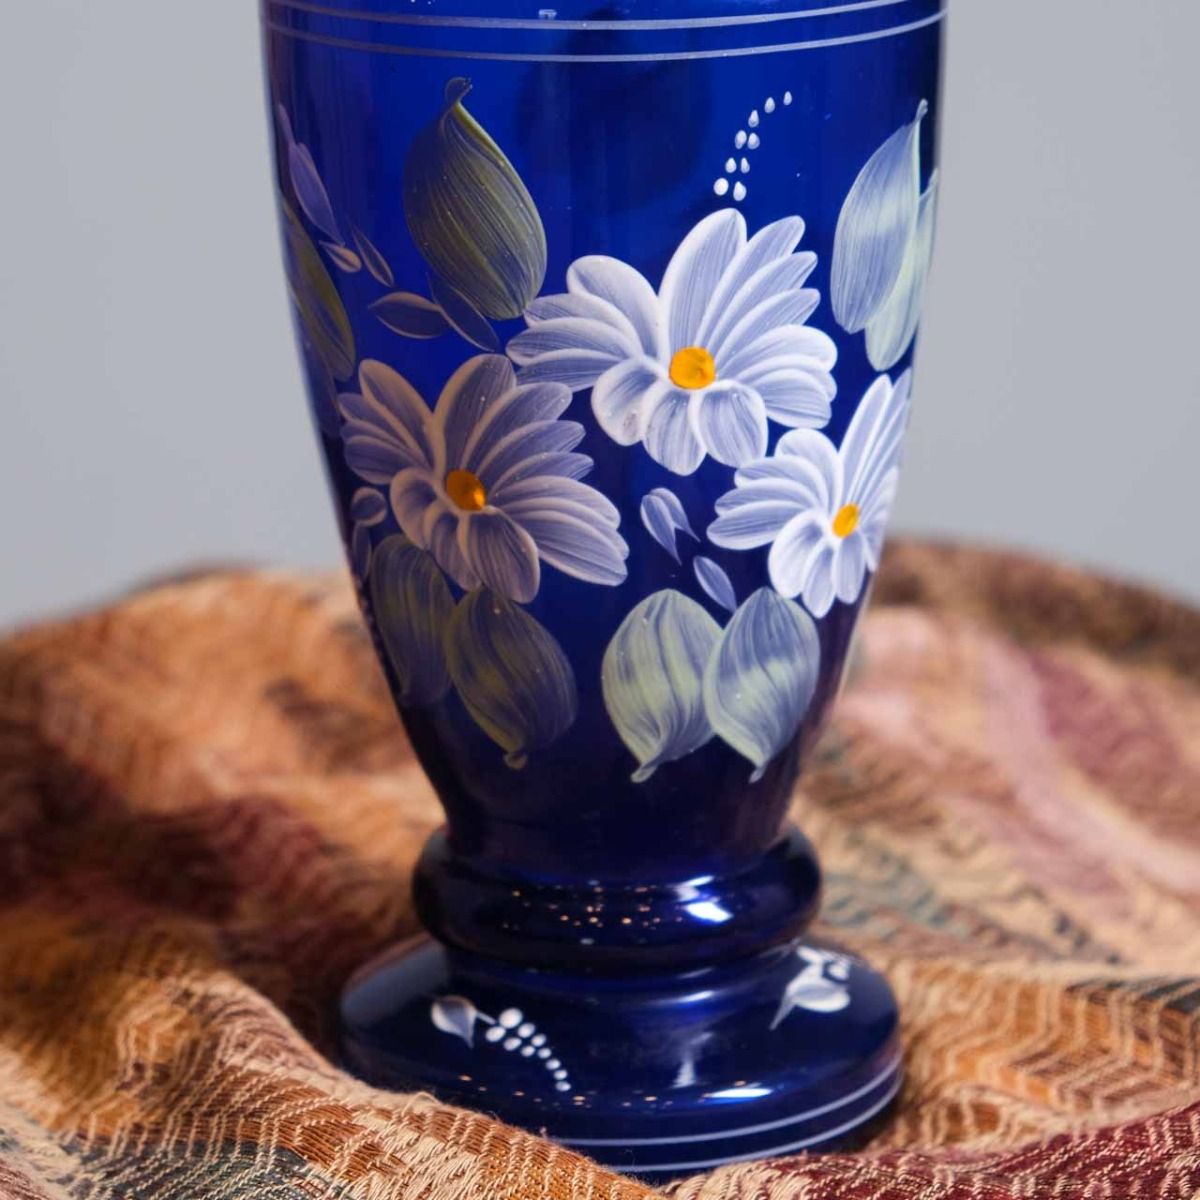 Antique Glass Vase, antique vase decorated with hand-painted floral patterns